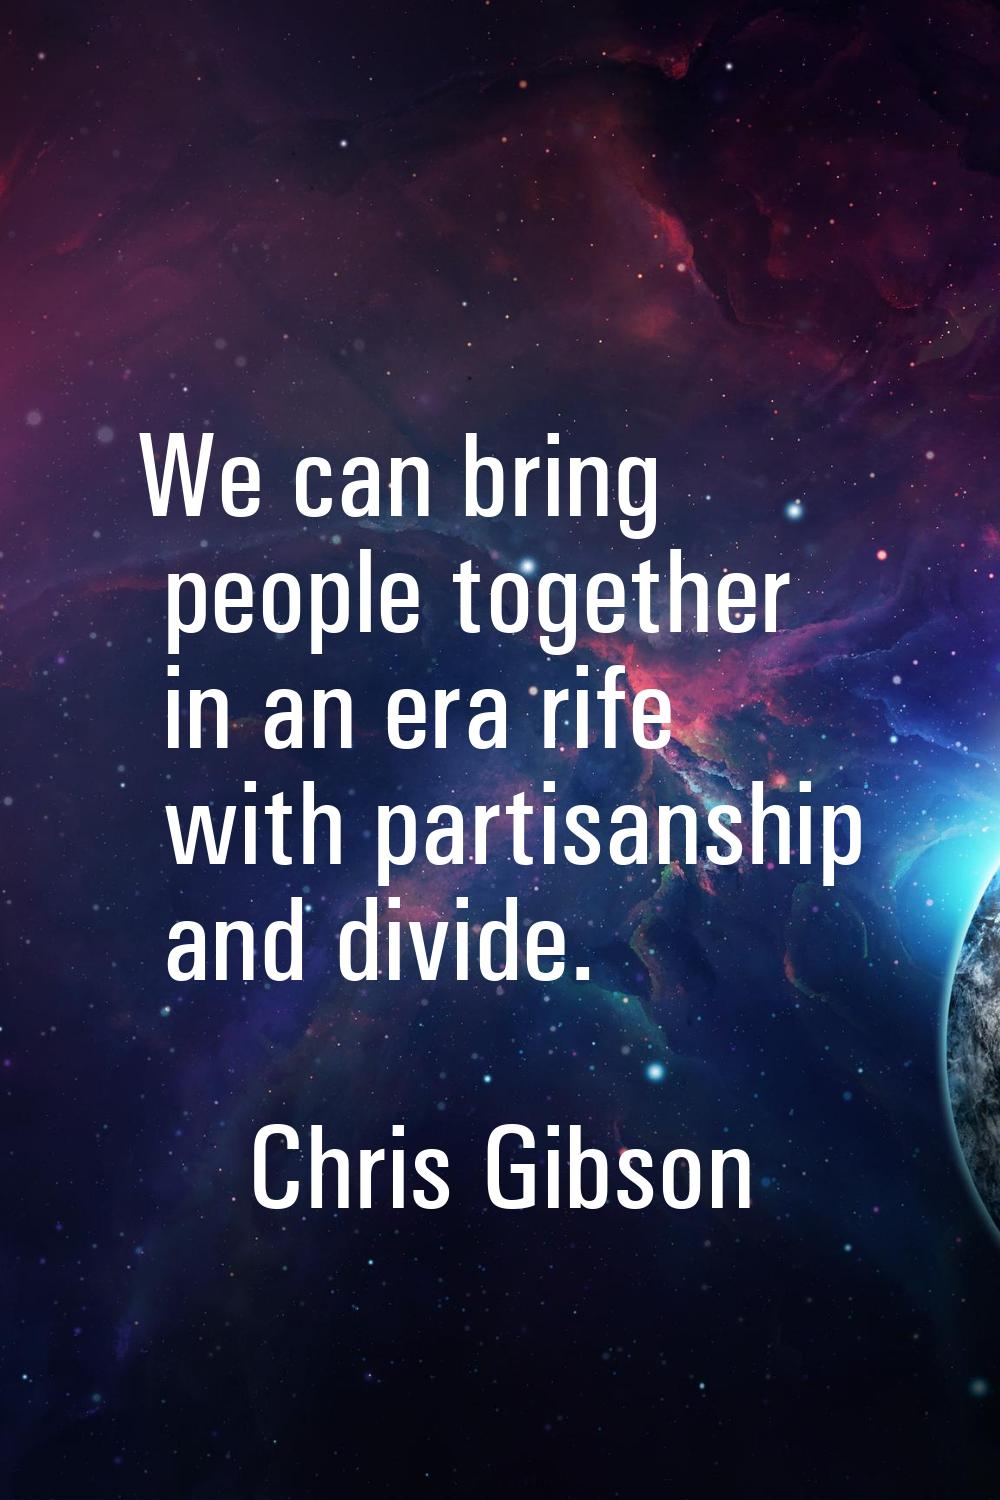 We can bring people together in an era rife with partisanship and divide.